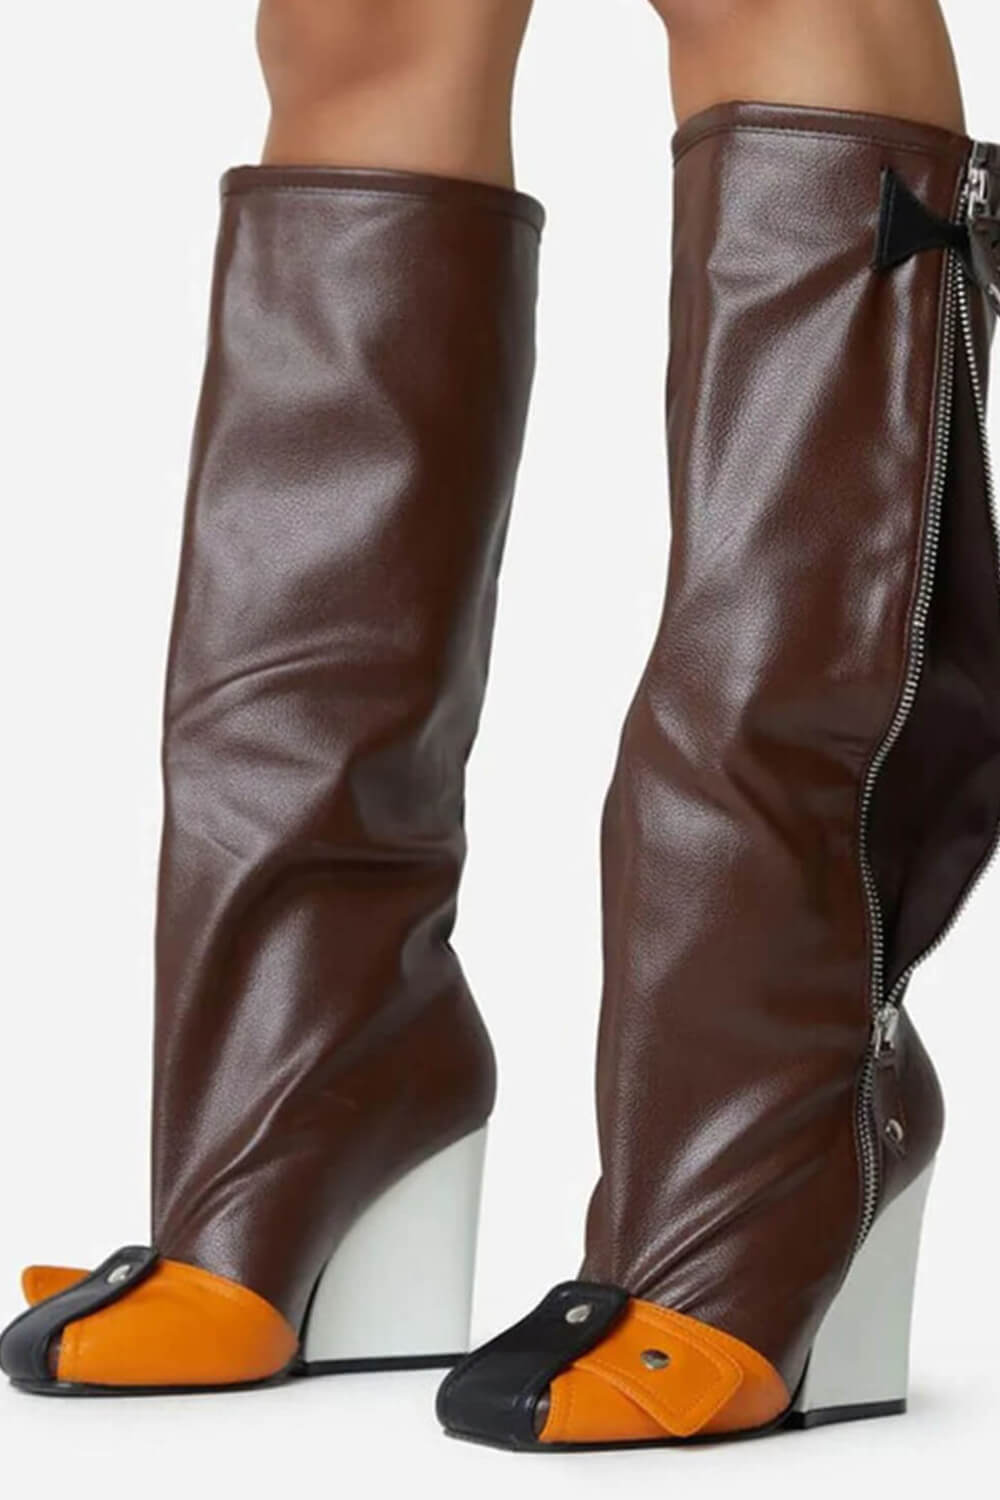 Buckle Detail Square Toe Blue Wedge Heel Knee High Long Boots - Brown & White